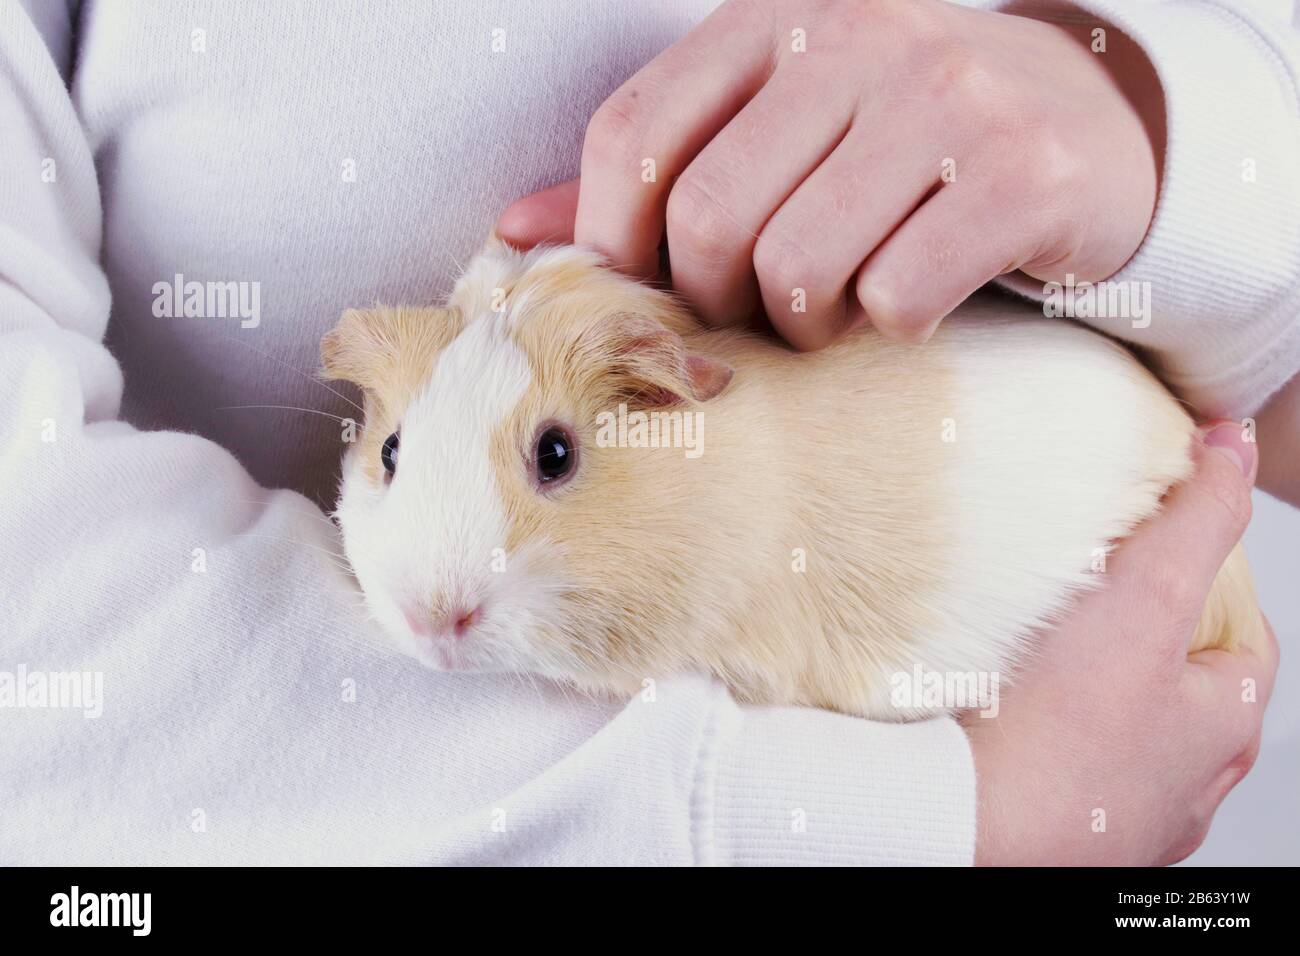 Guinea Pig Being Petted and cradled in the arms of a person or child, close up. Stock Photo